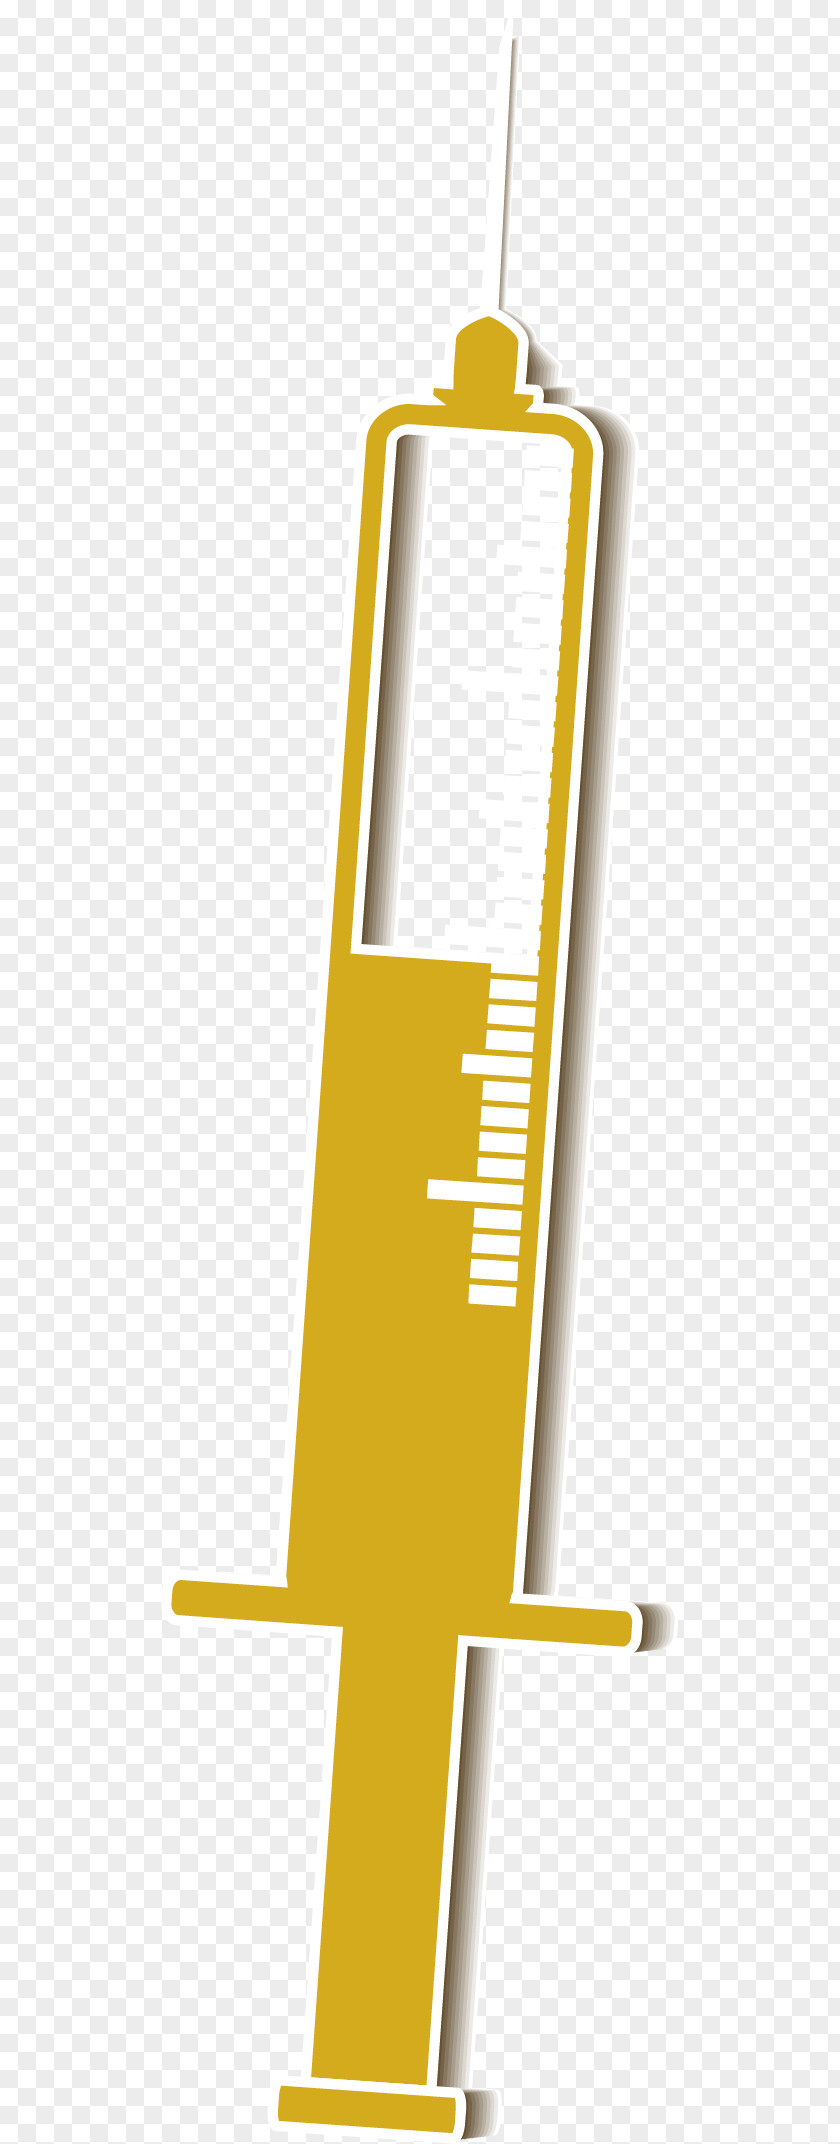 Yellow Syringe Graphic Design Hypodermic Needle Injection PNG